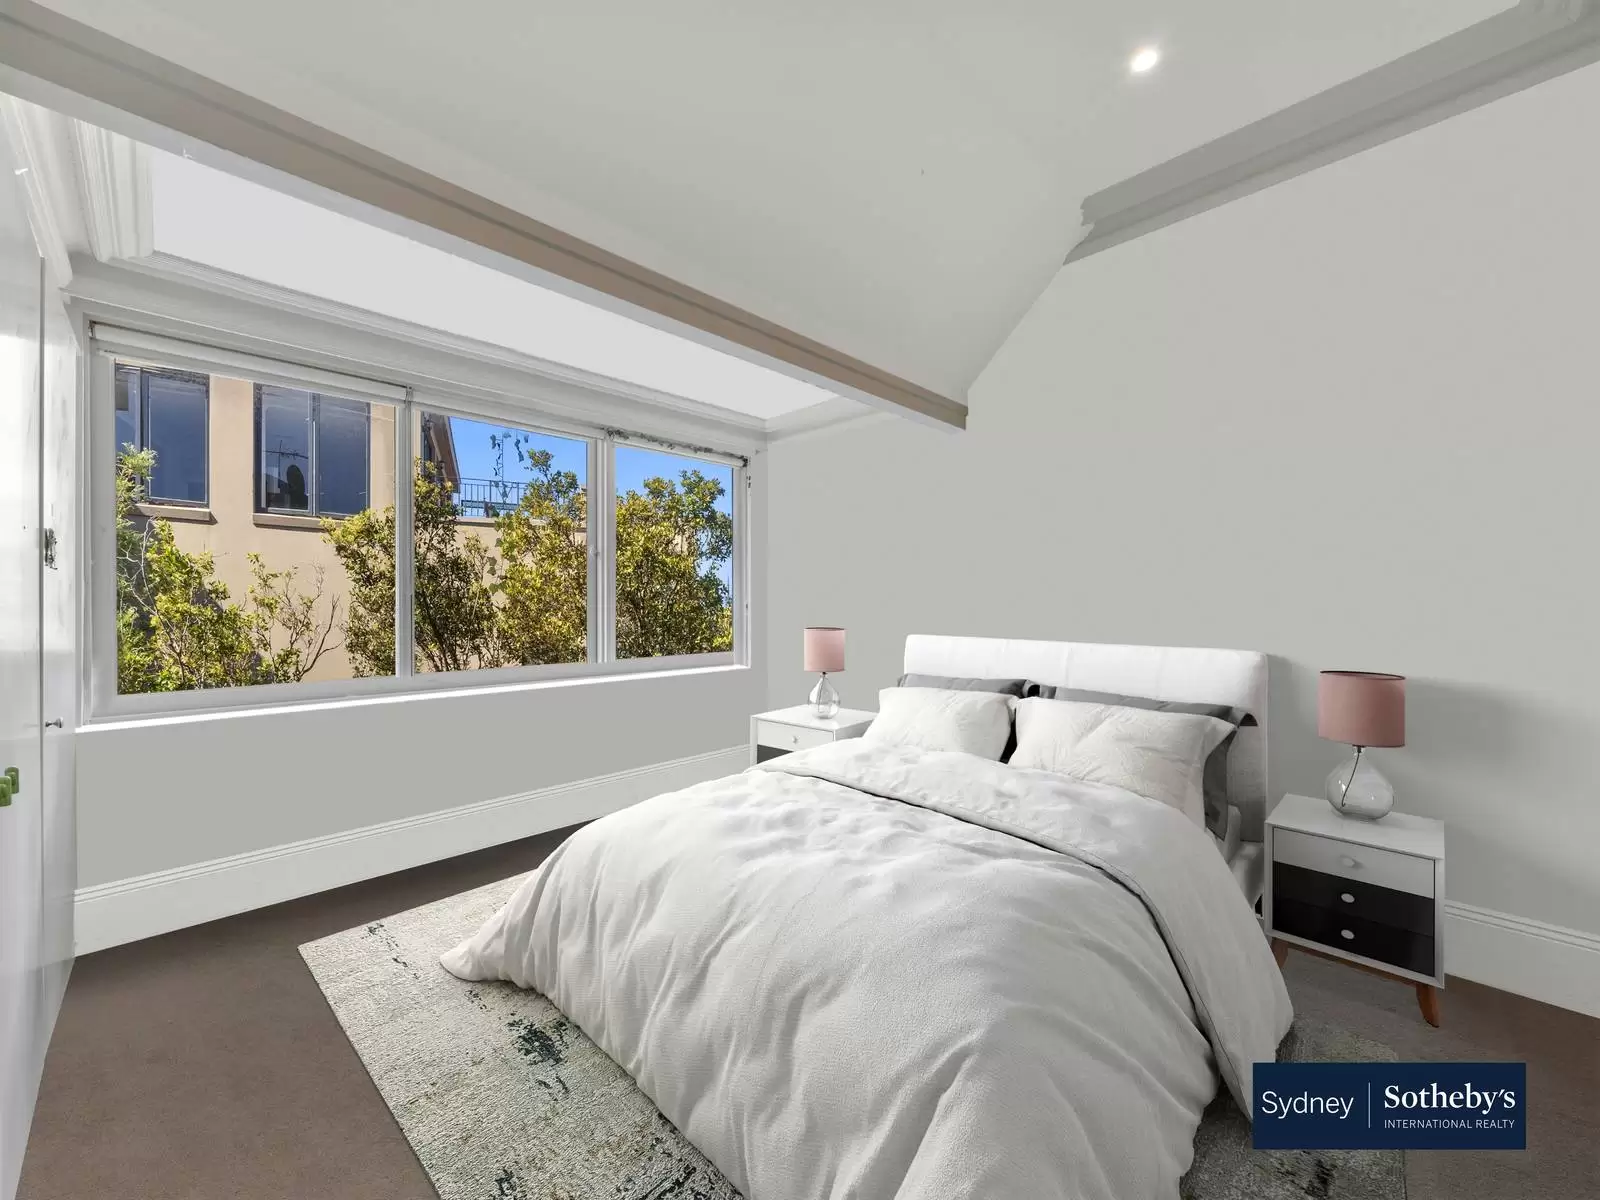 25 New South Head Road, Vaucluse Leased by Sydney Sotheby's International Realty - image 7